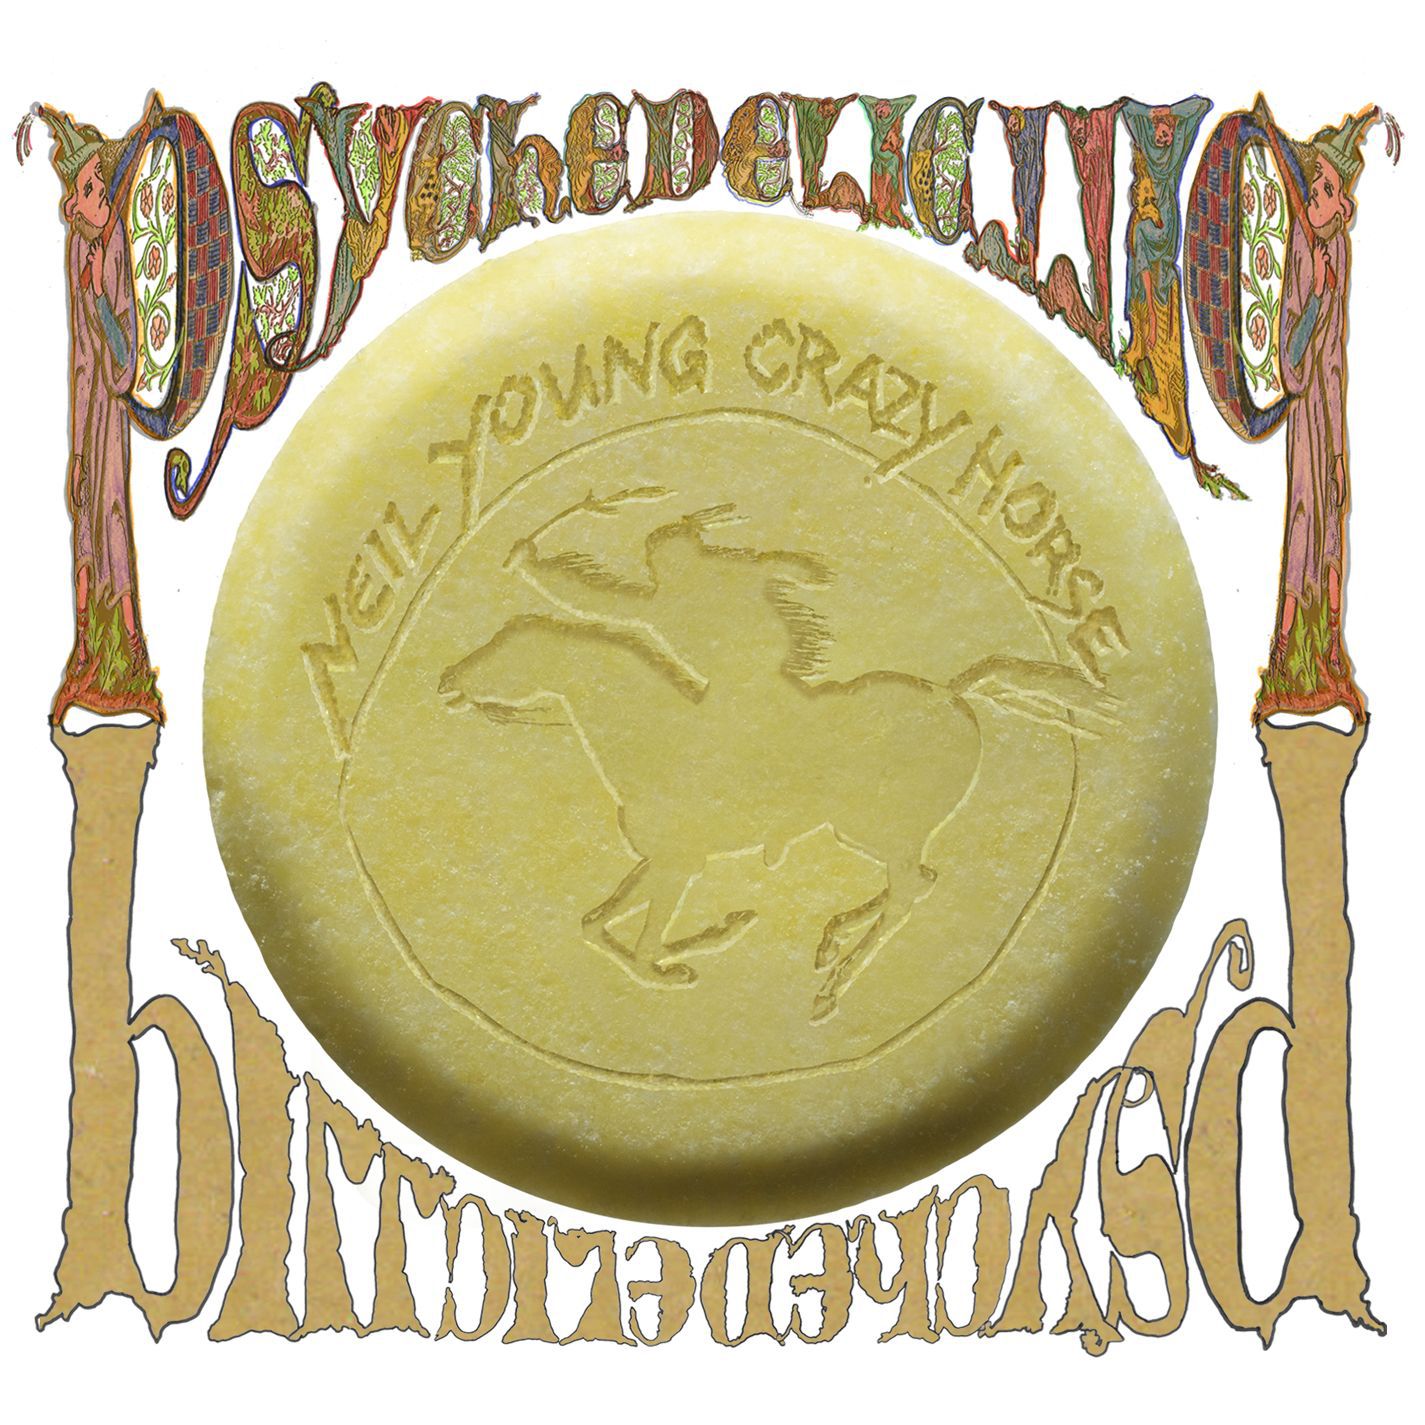 Neil Young & Crazy Horse - Psychedelic Pill (2012) [FLAC 24bit/96kHz]